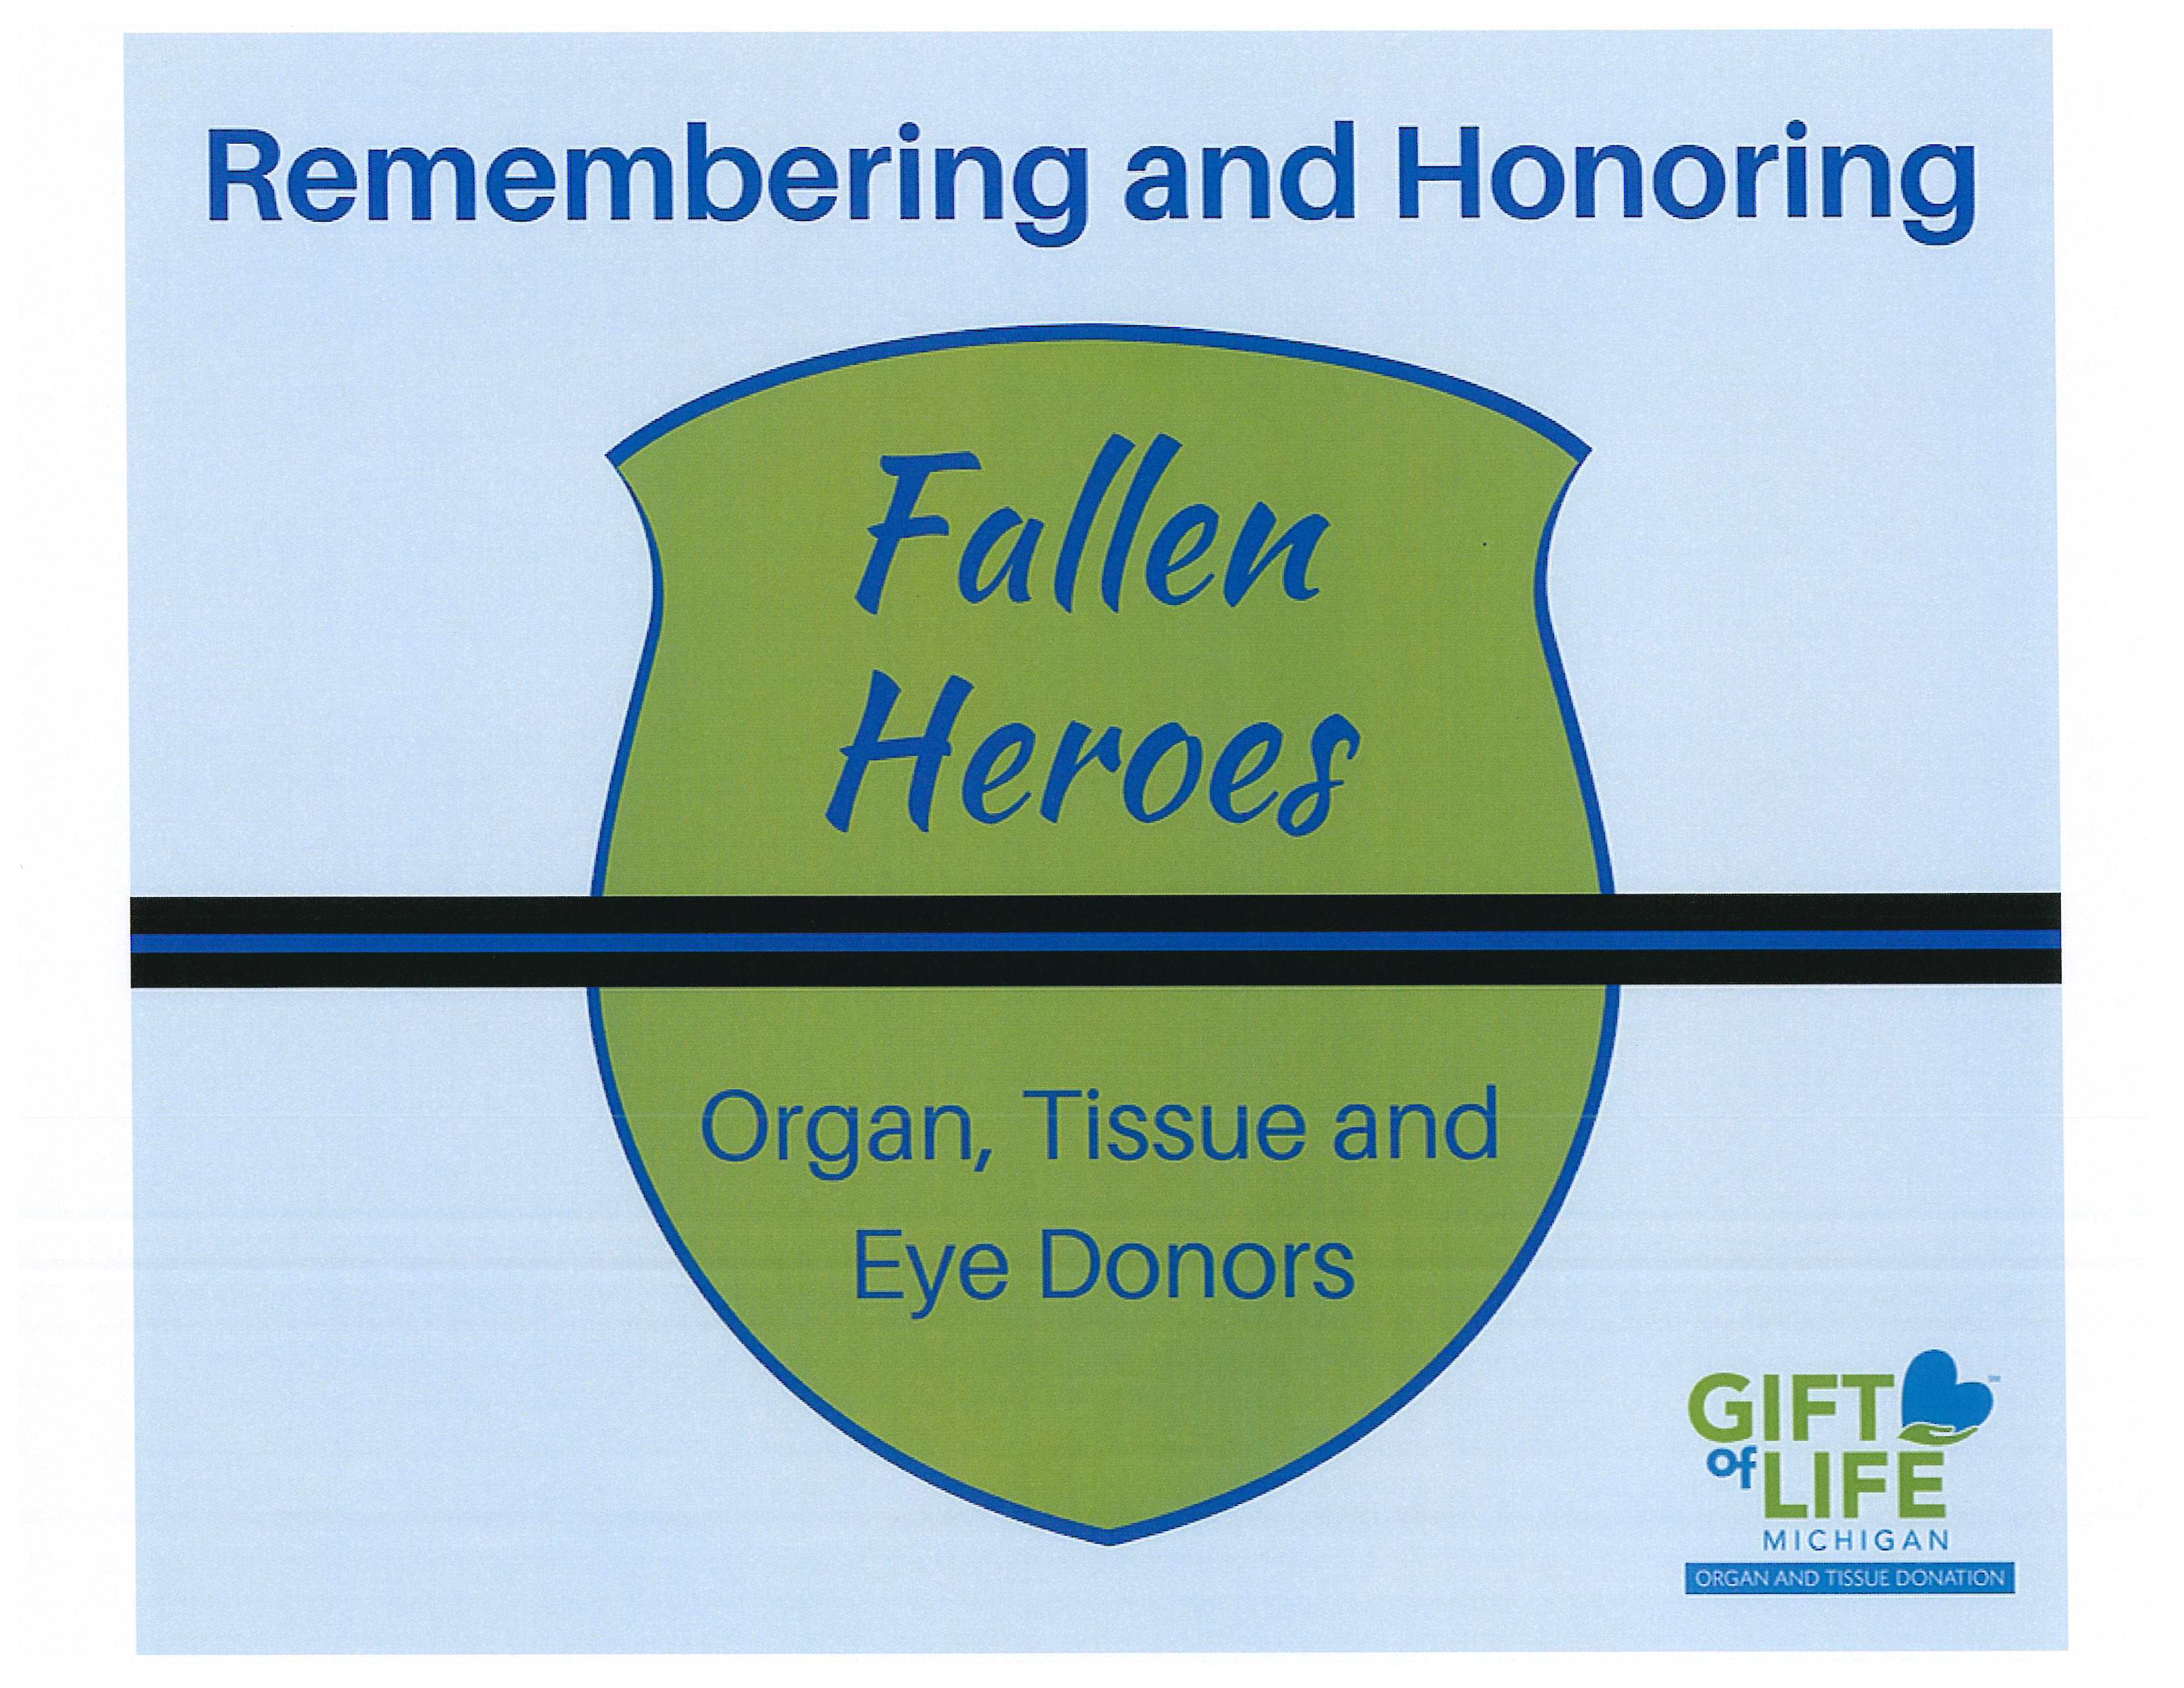 Gift Of Life – Remembering and Honoring Fallen Heroes